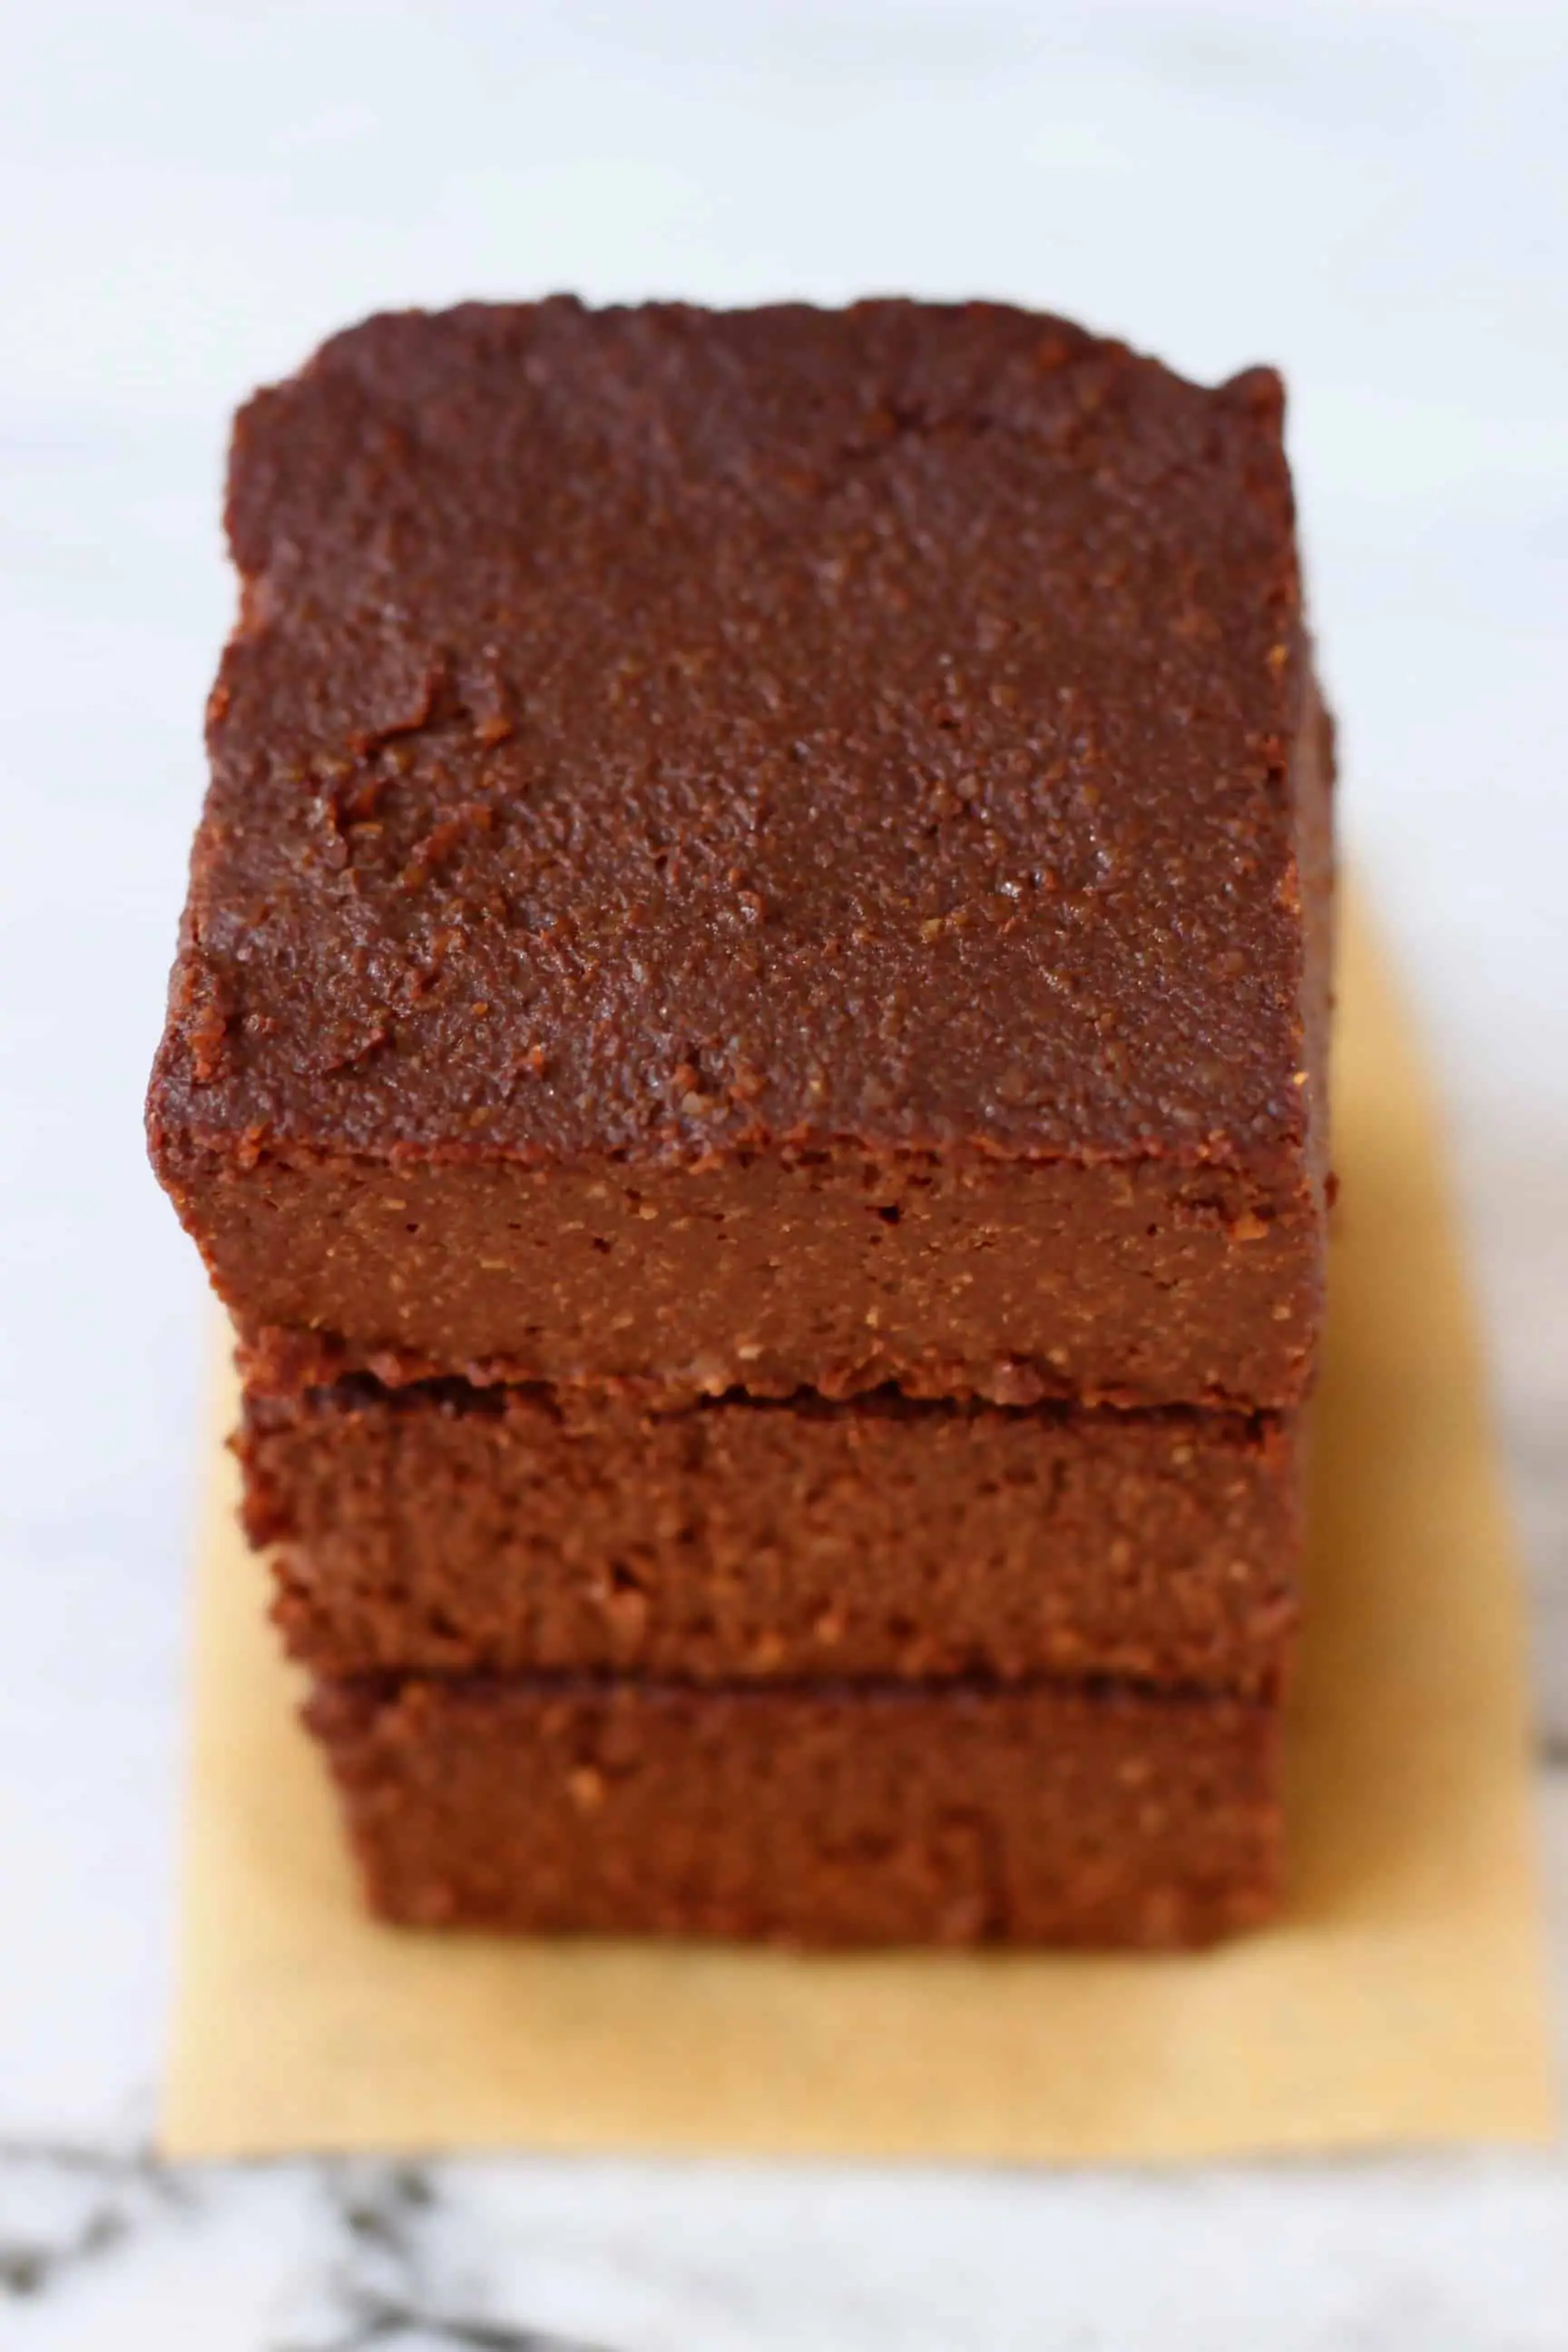 Three pumpkin brownies stacked on top of each other on a sheet of brown baking paper against a marble background